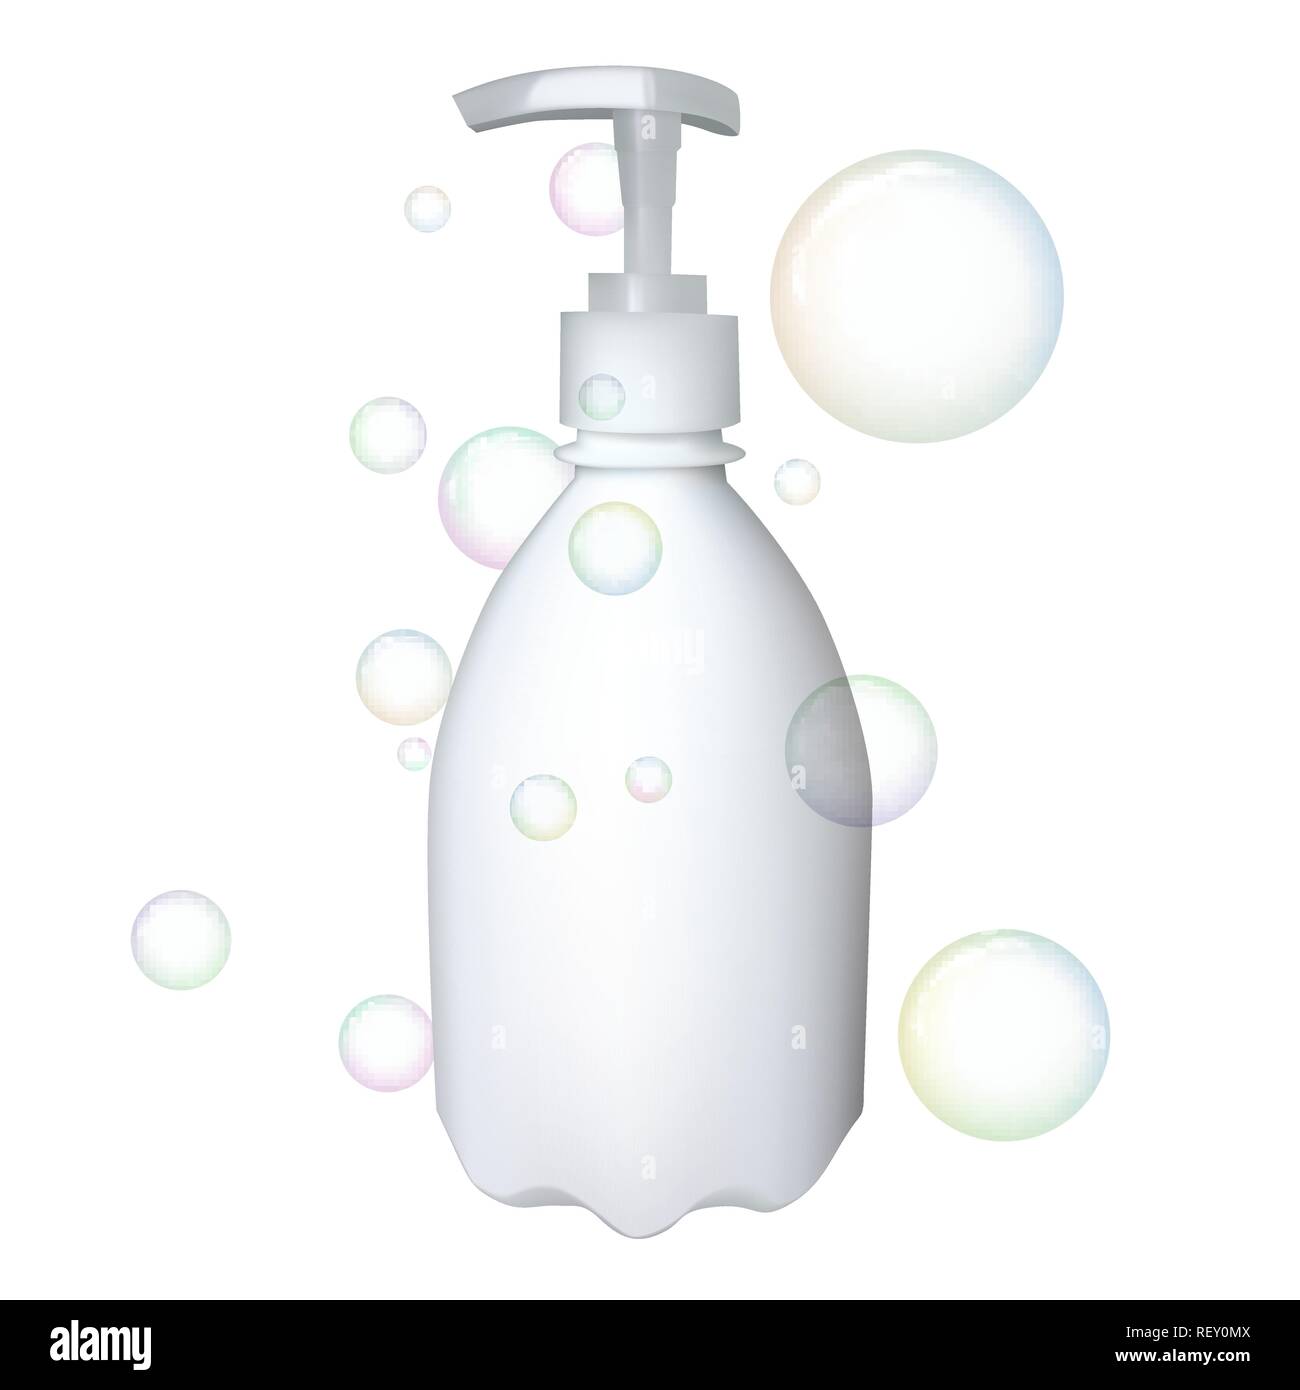 Plastic bottle with dispenser. Vector illustration. Soap container. Bubble. Beauty industry Stock Vector